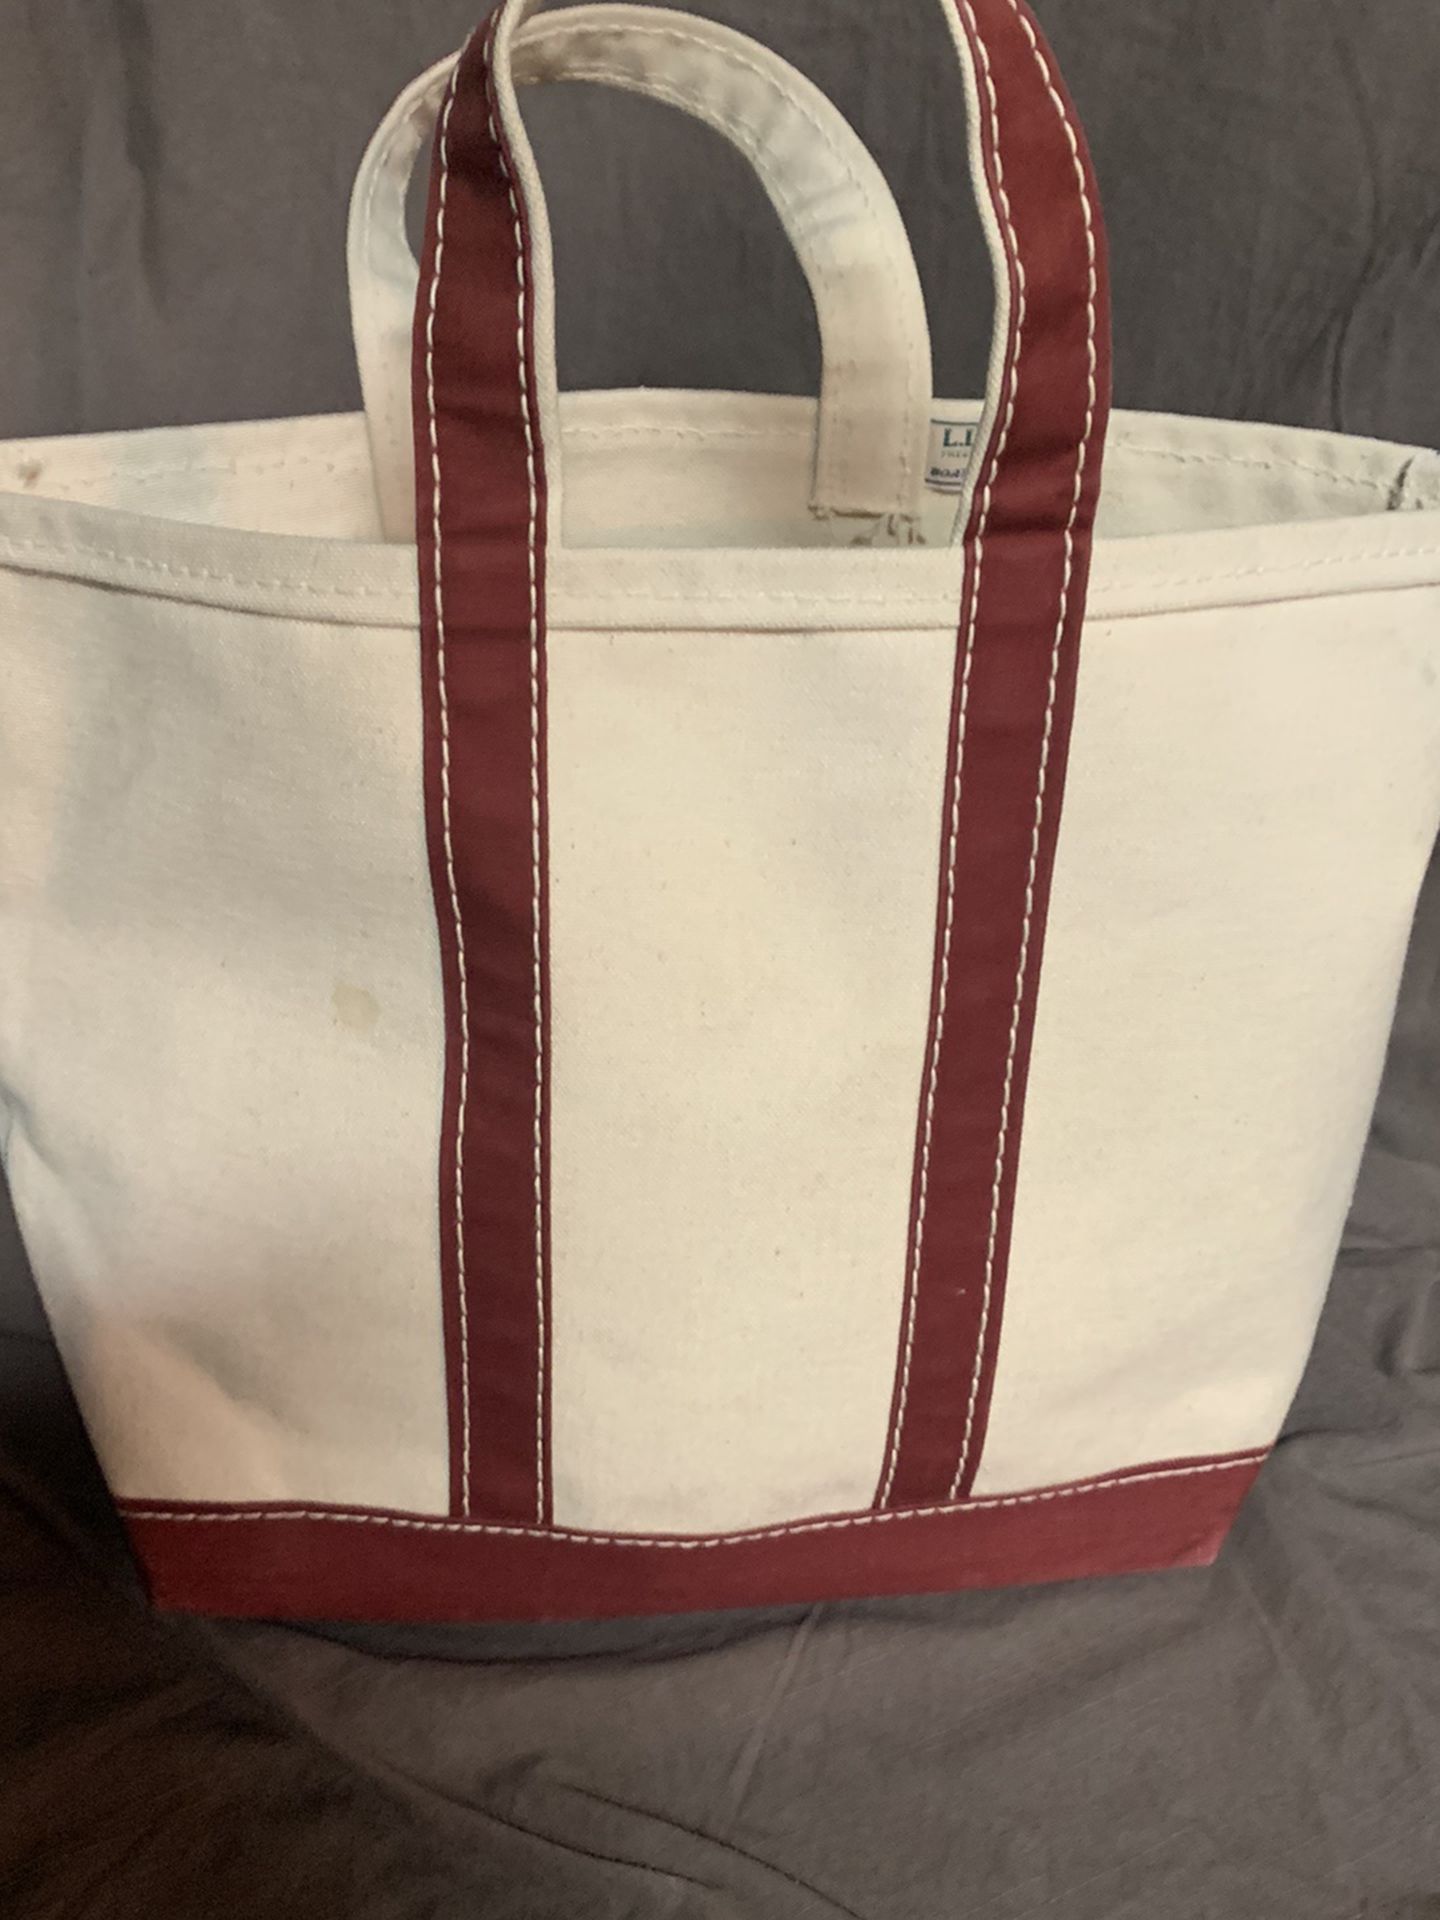 Vintage 1980s LL Bean boat and tote bag